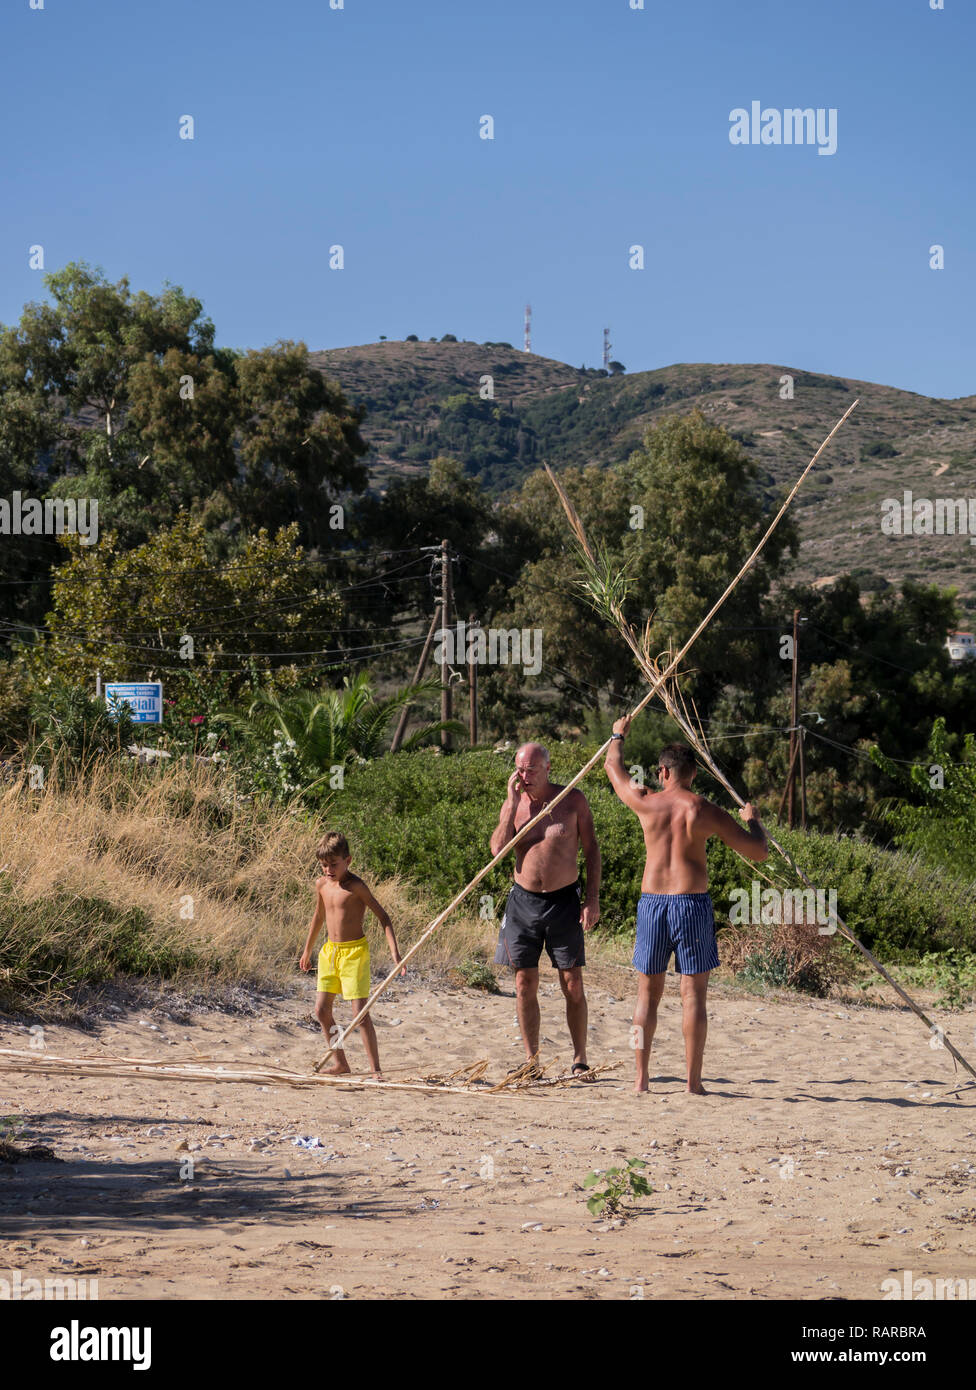 Male family group building a wigwam on the beach Stock Photo